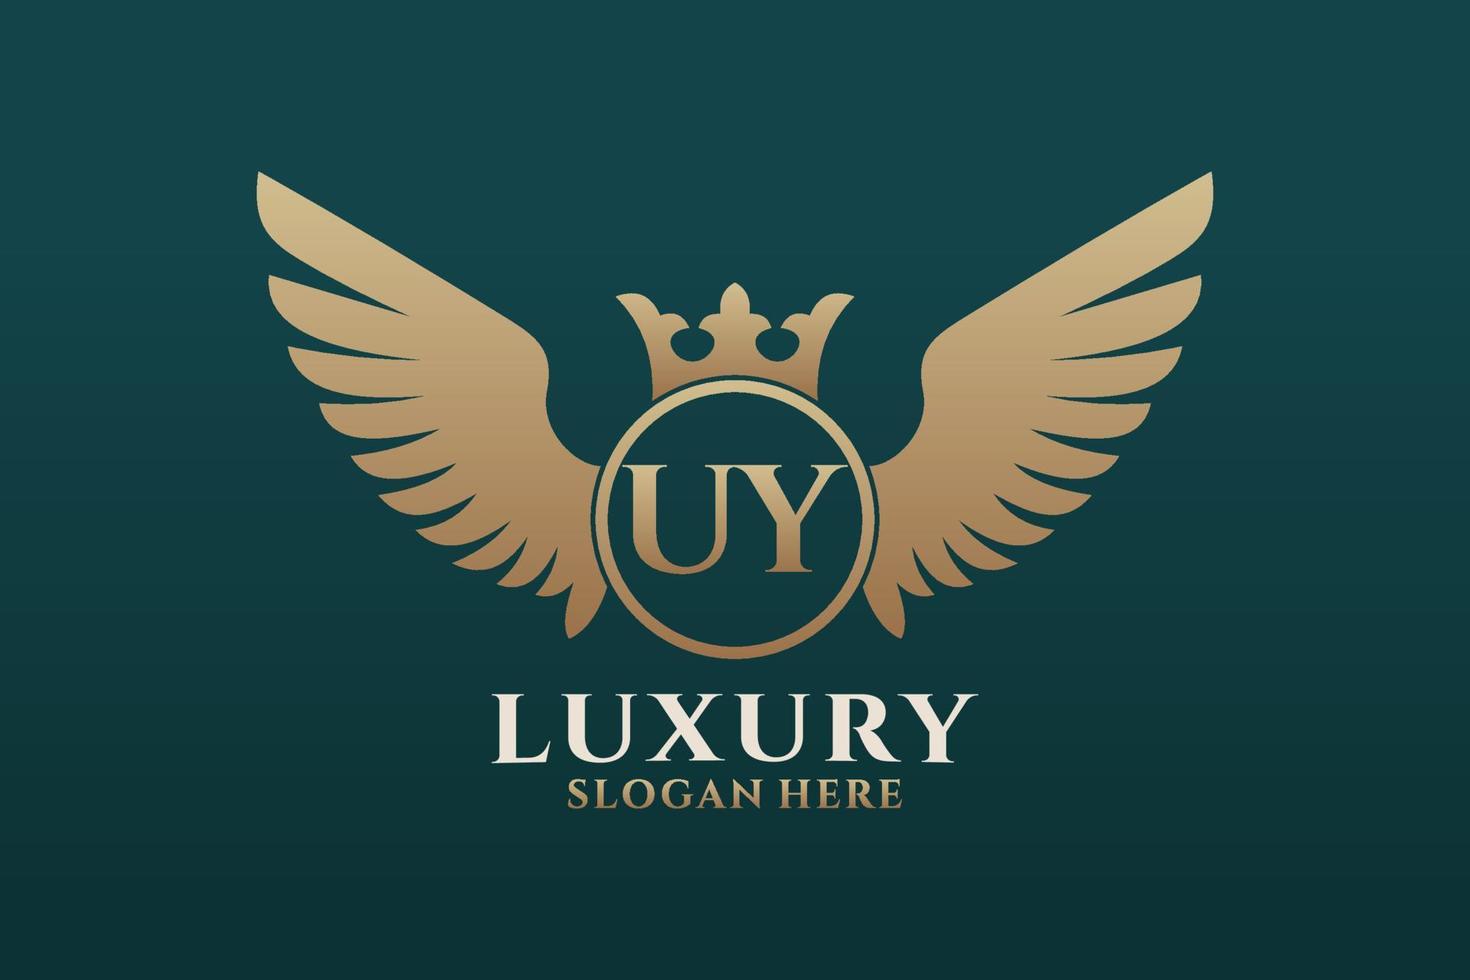 Luxury royal wing Letter UY crest Gold color Logo vector, Victory logo, crest logo, wing logo, vector logo template.